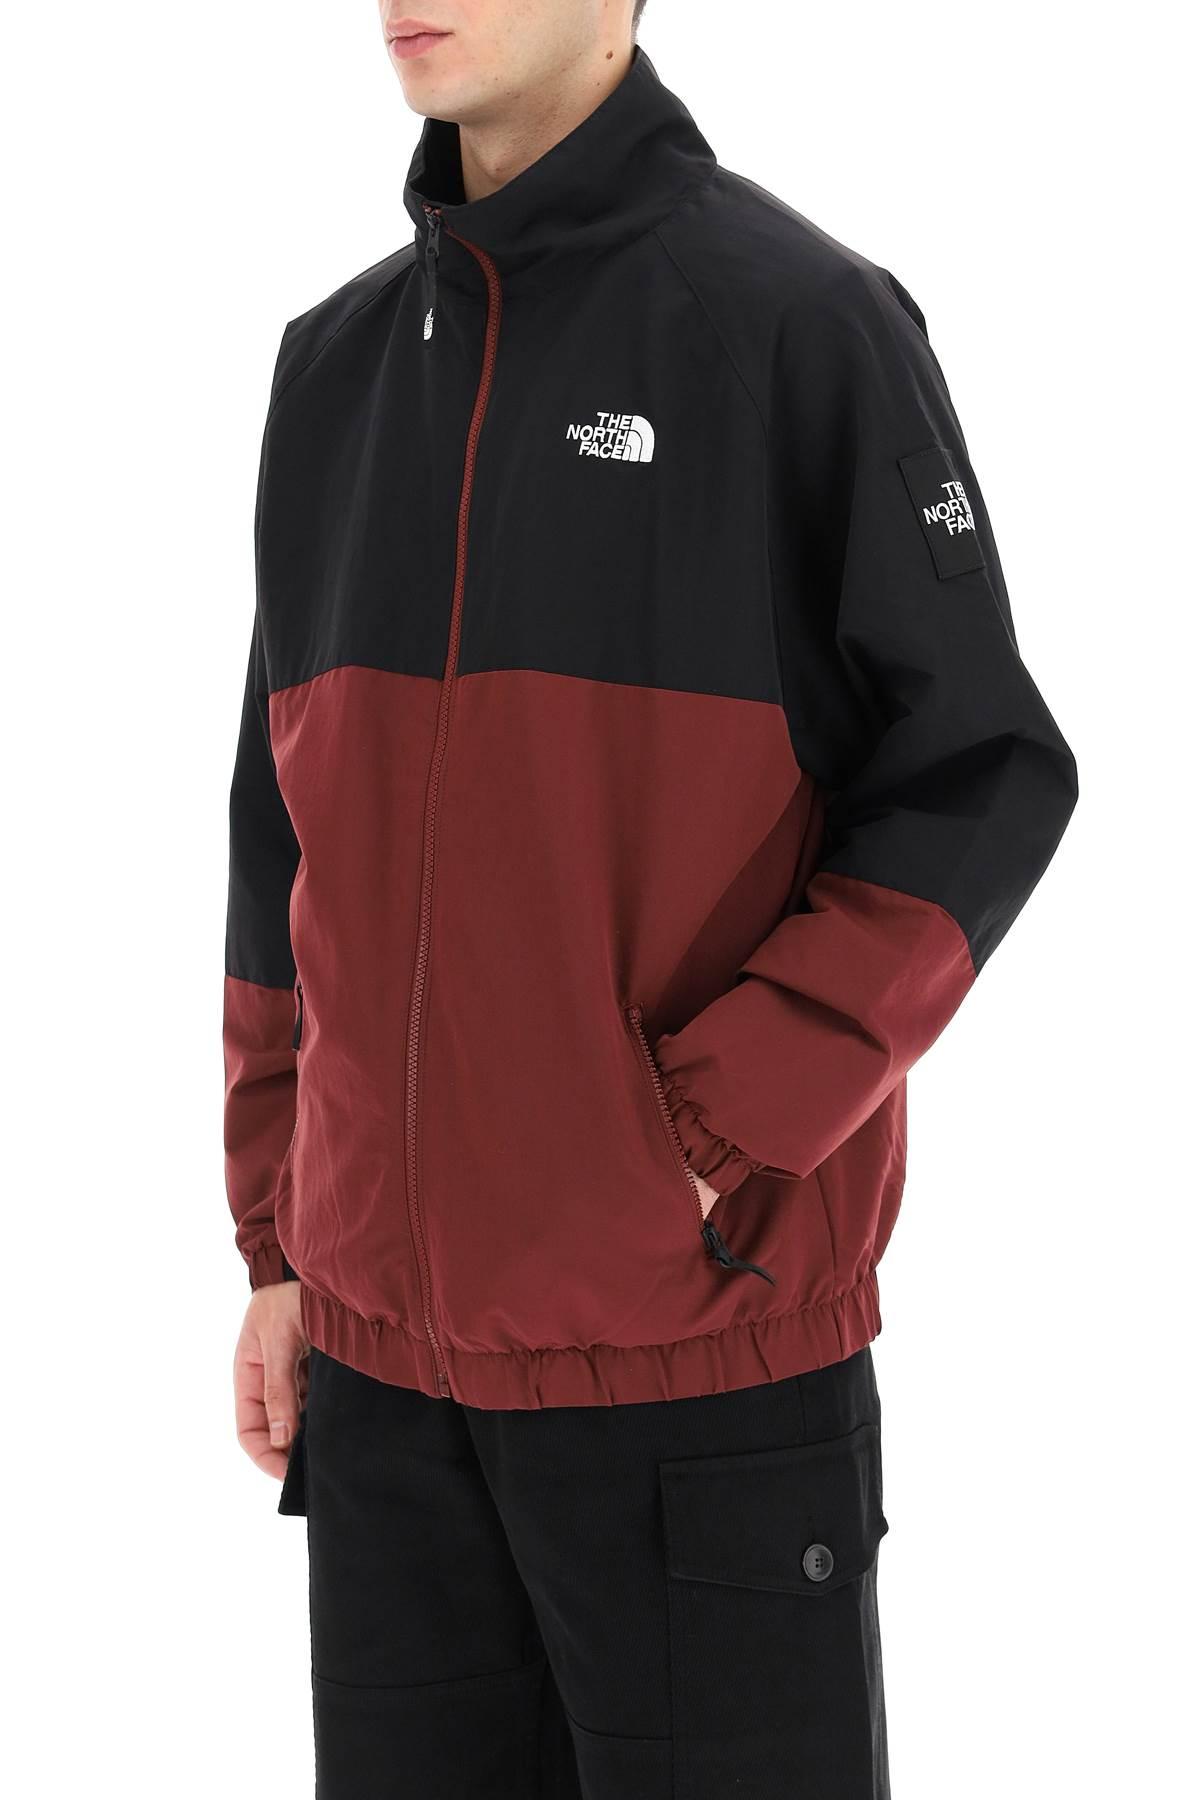 The North Face Men's Mtn Archives Track Jacket